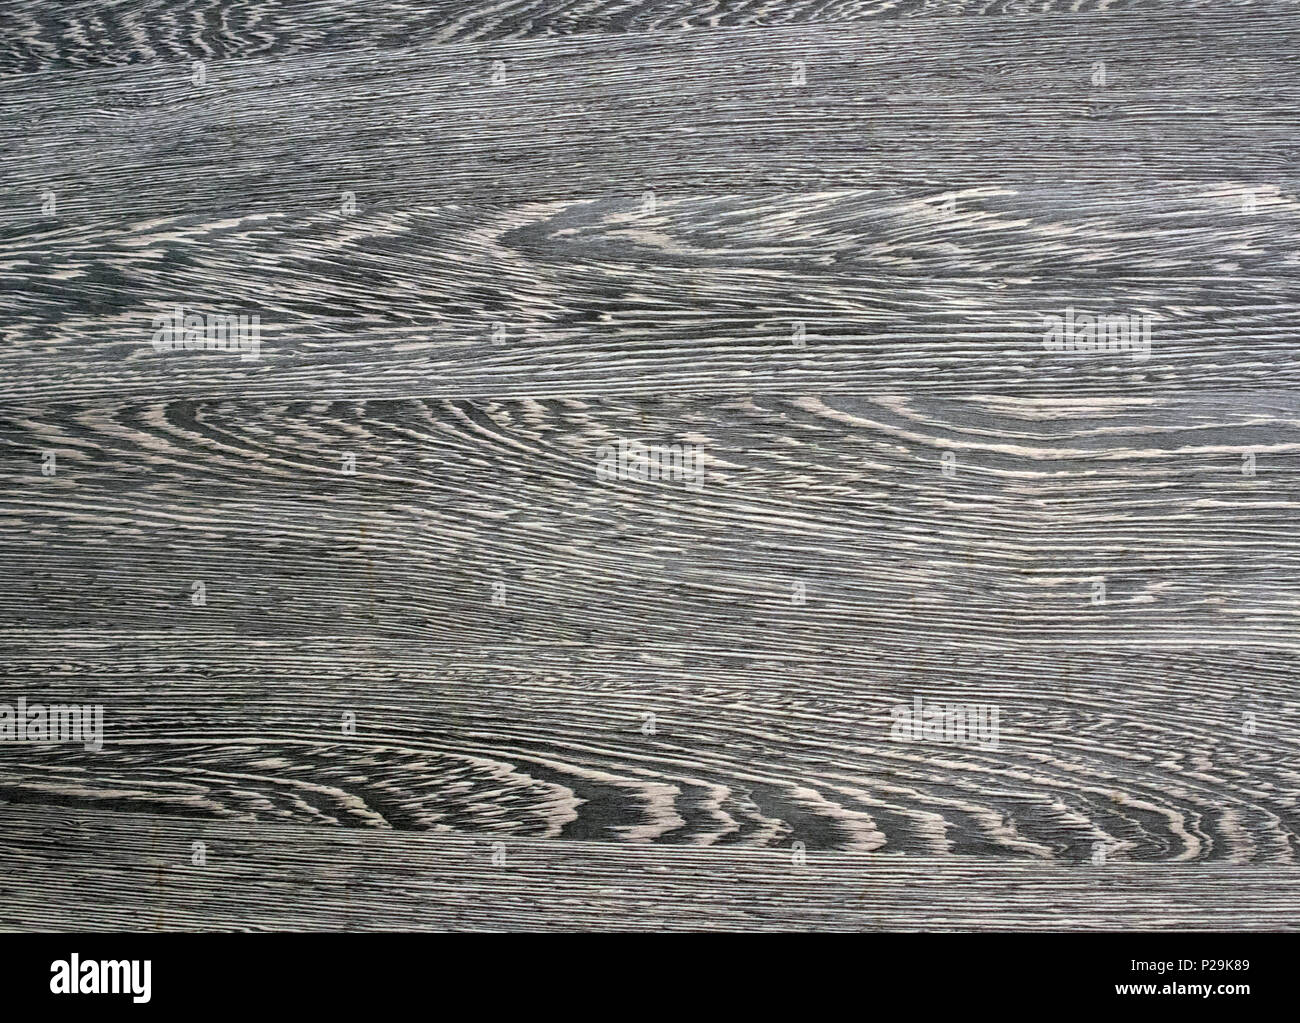 Gray wooden rustic texture, natural rough surface, may be used as background Stock Photo